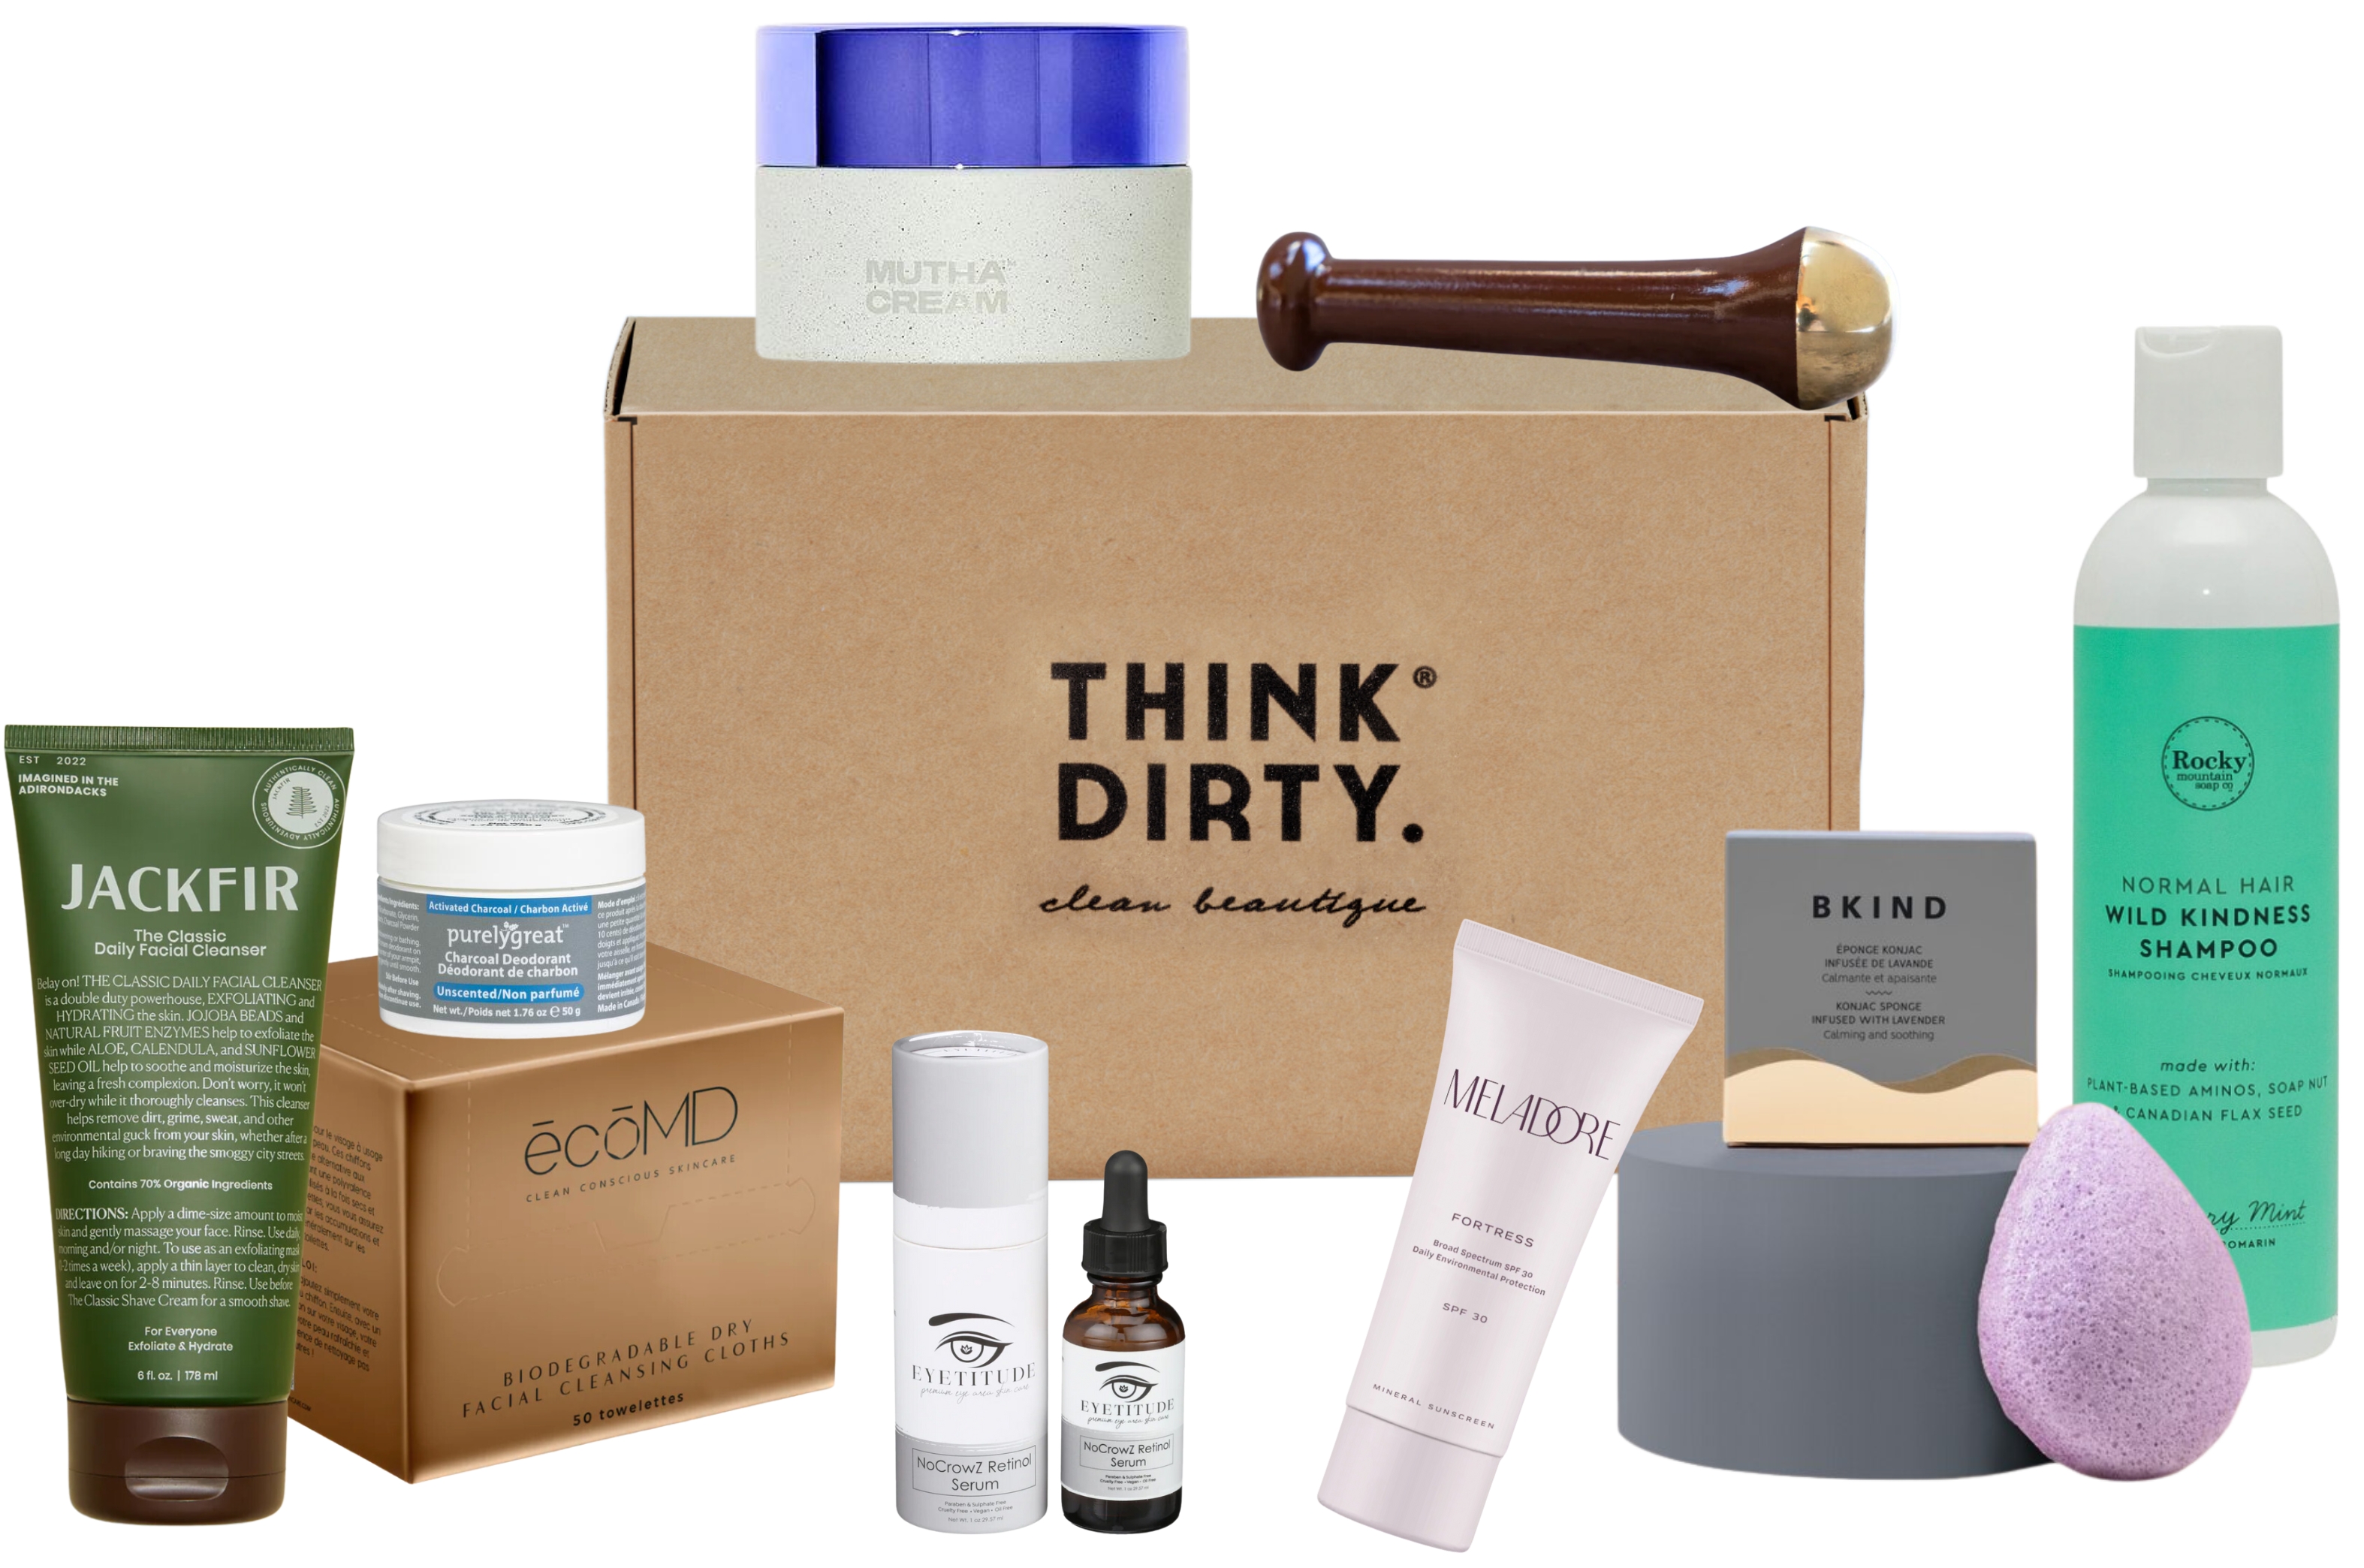 Organic All Natural Skin Care Brands - The Best Clean and Non Toxic Skin  Products